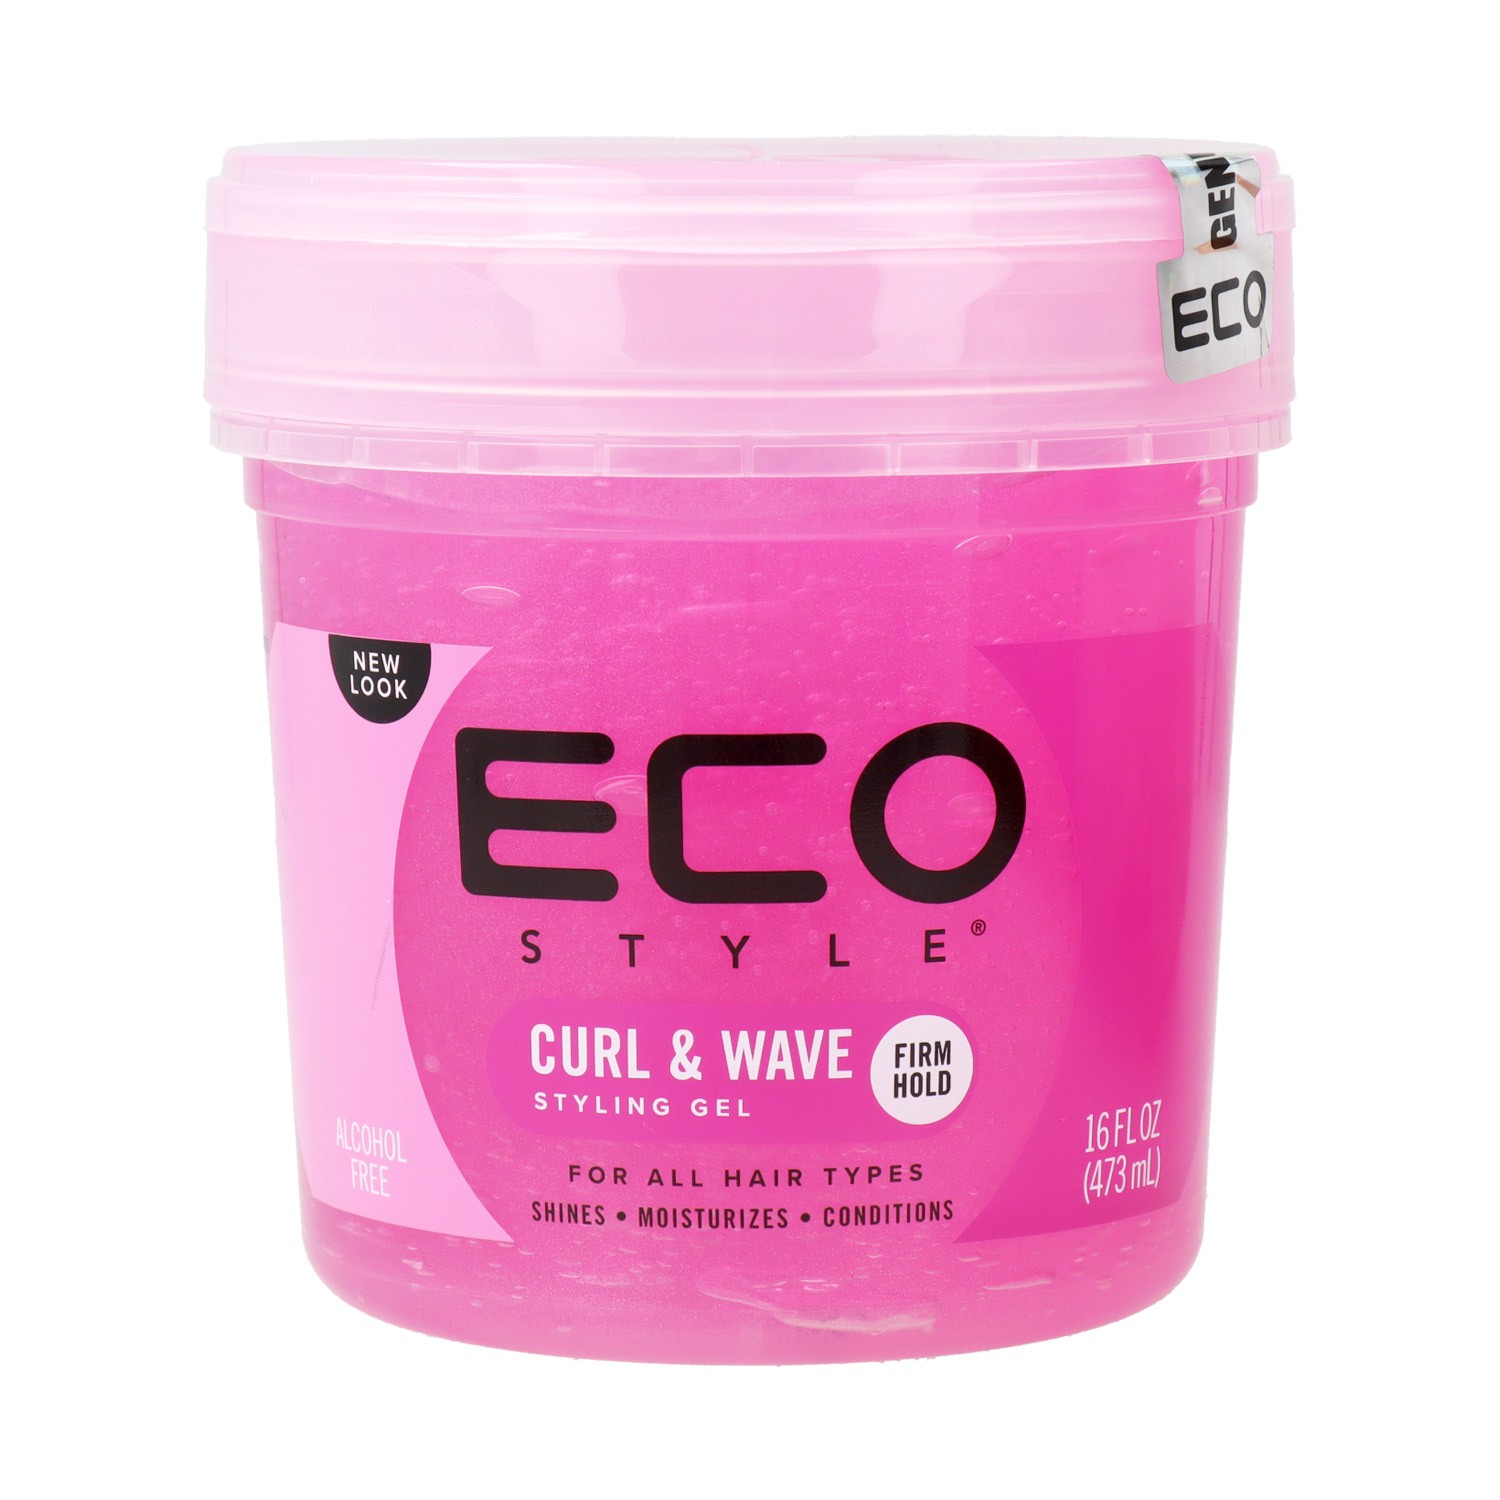 Eco Styler Styling Gel Curl & Wave Pink 473 ml